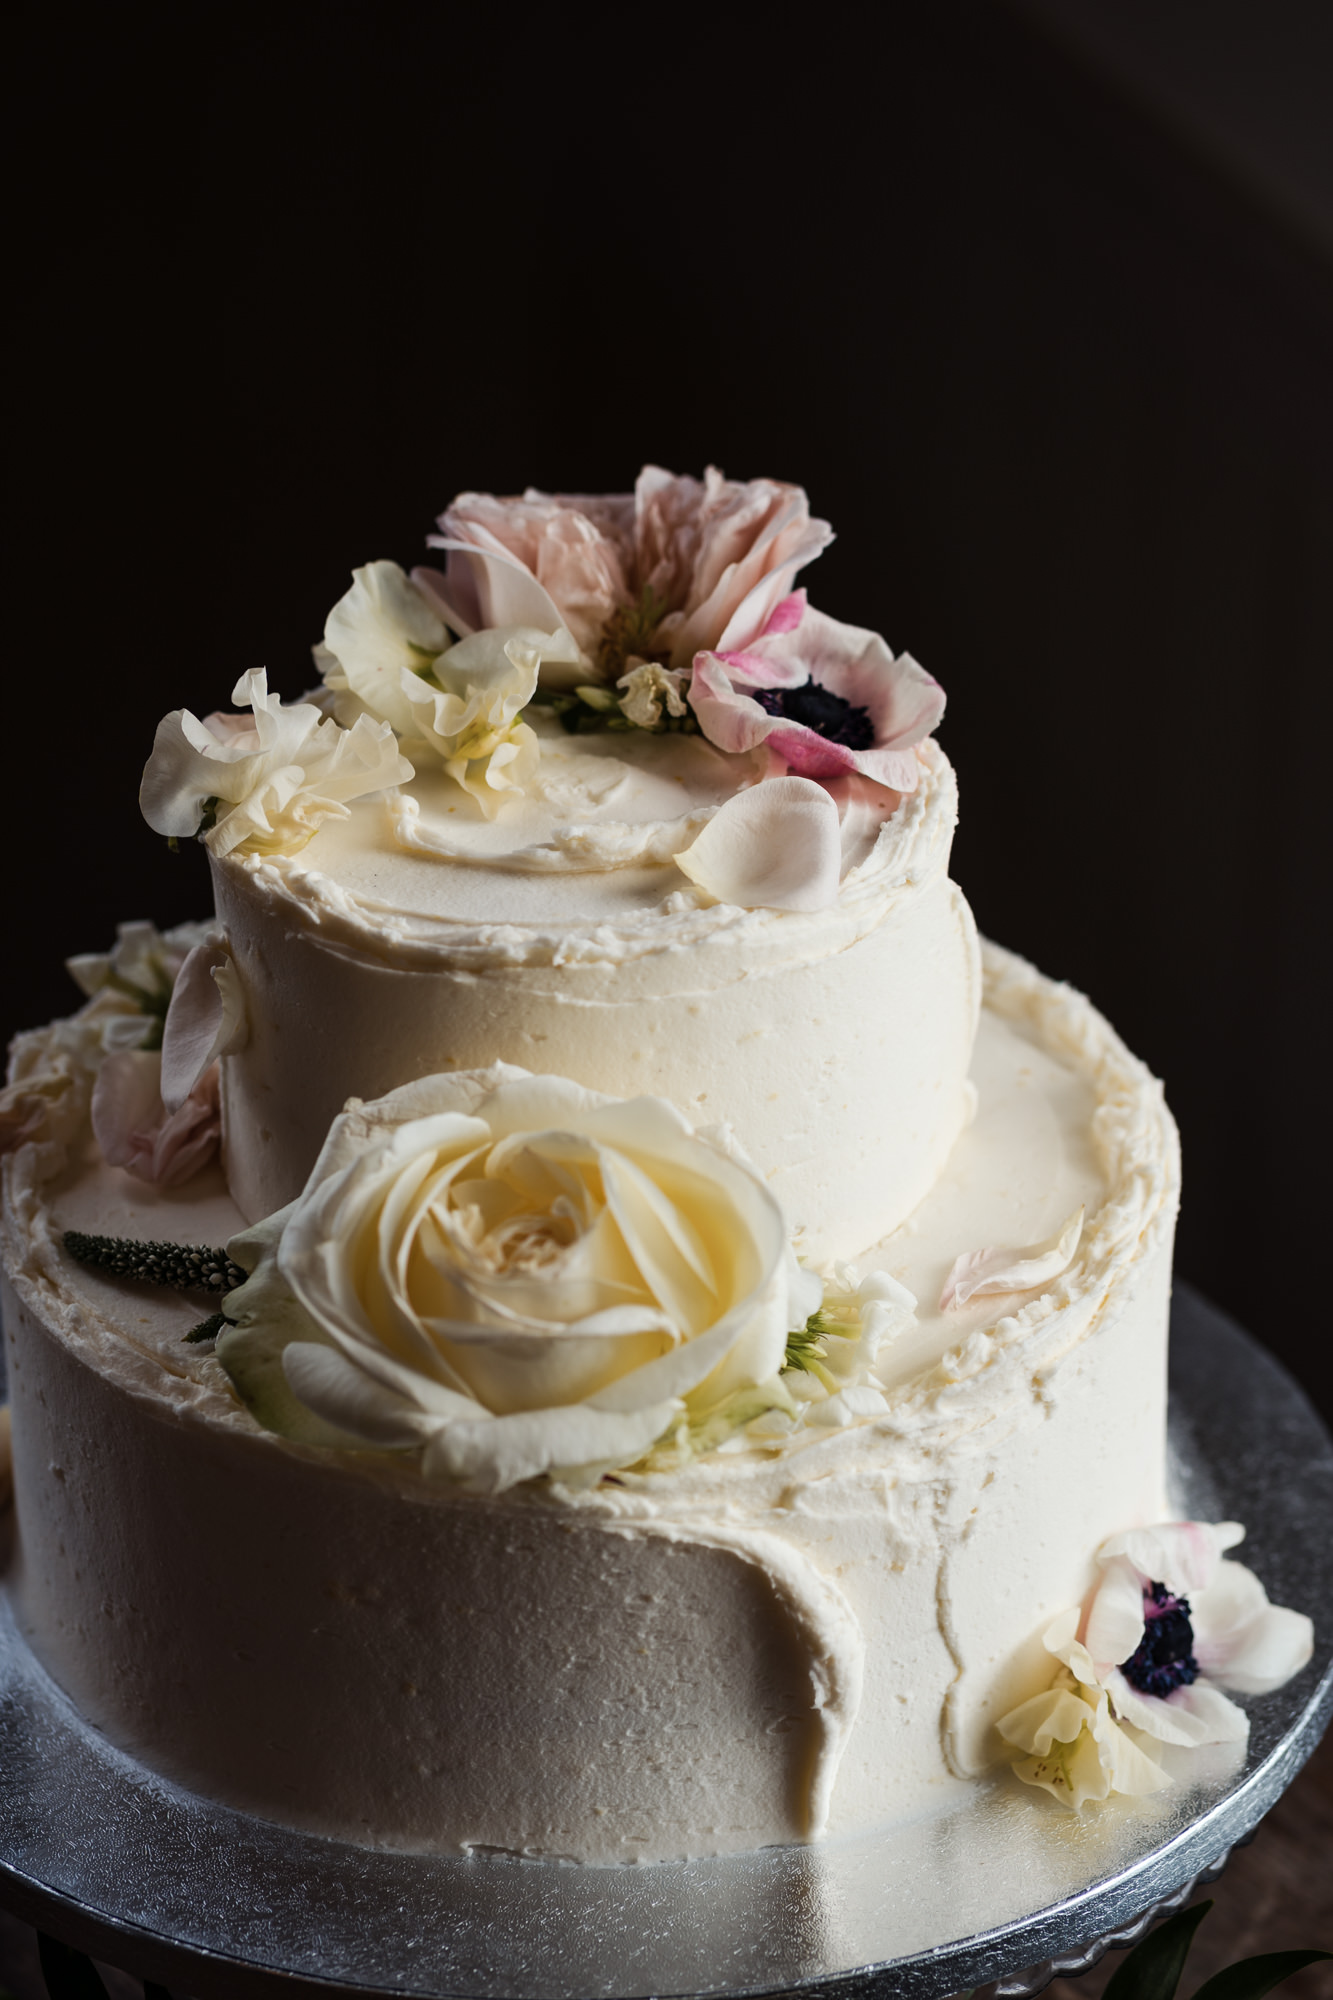 close up of flowers decorated on a two tier white wedding cake from london's Violet Cakes By Claire Ptak